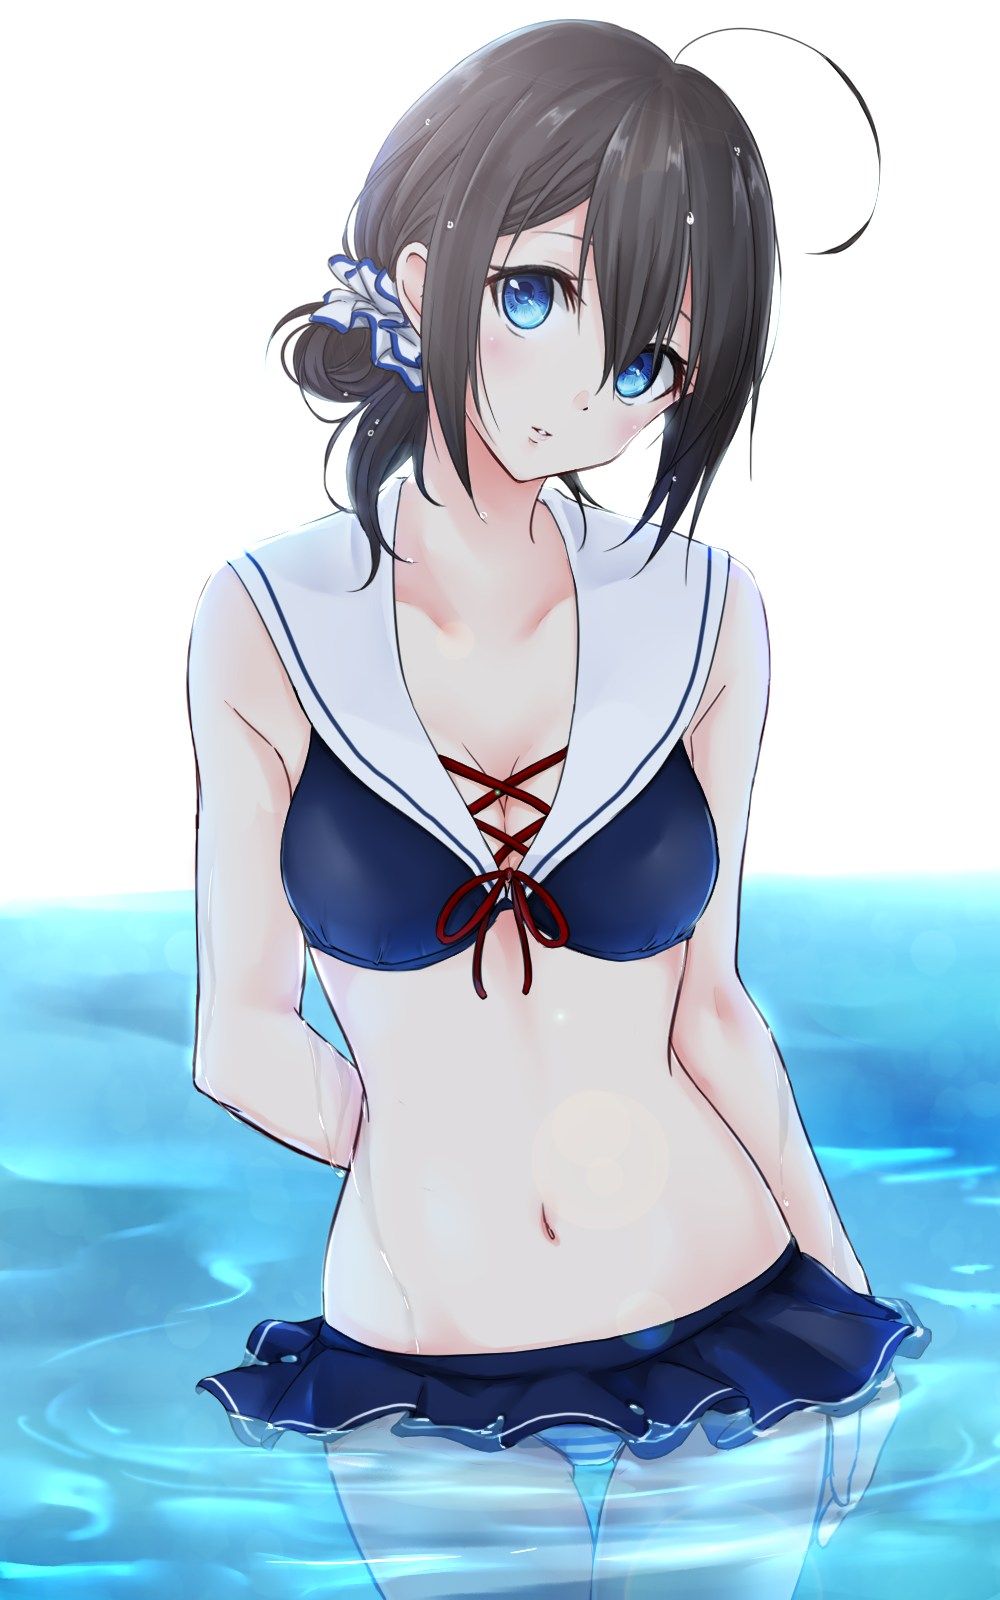 The image of the girl who wears the water of the case that I put the navel out as JK uniform is a sailor beach wear or wwwwwww 1